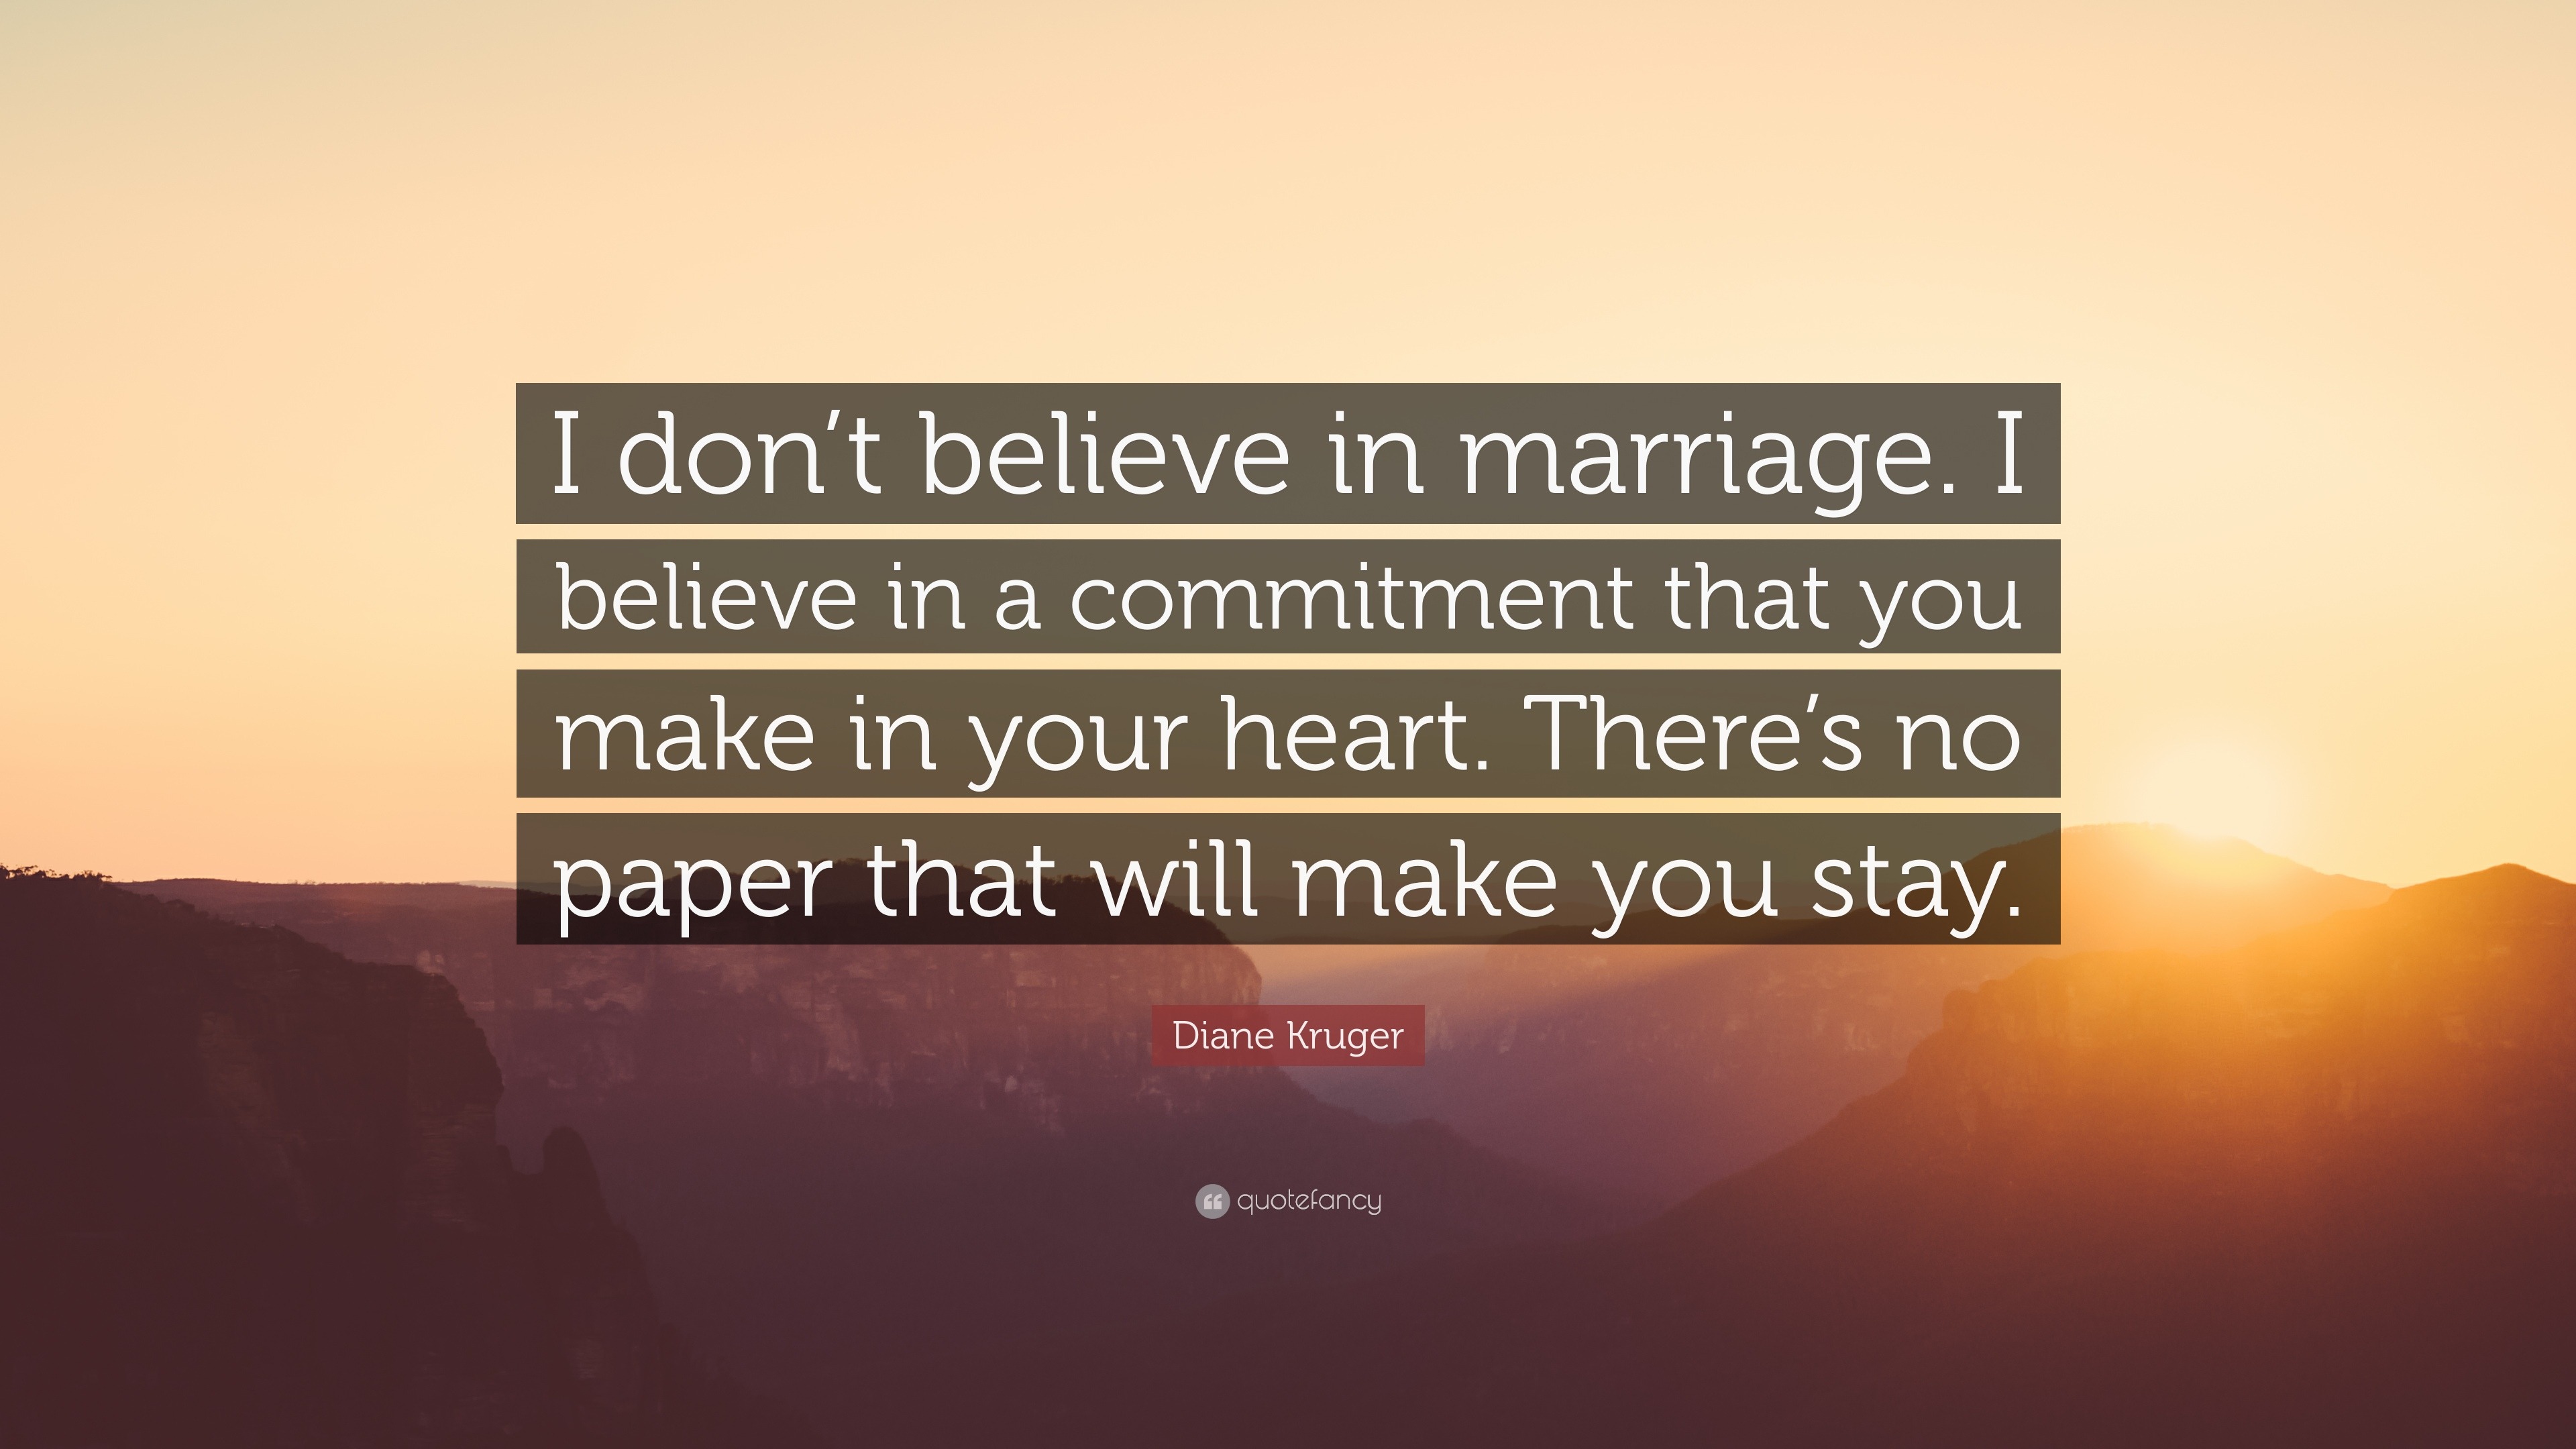 Diane Kruger Quote “I don t believe in marriage I believe in